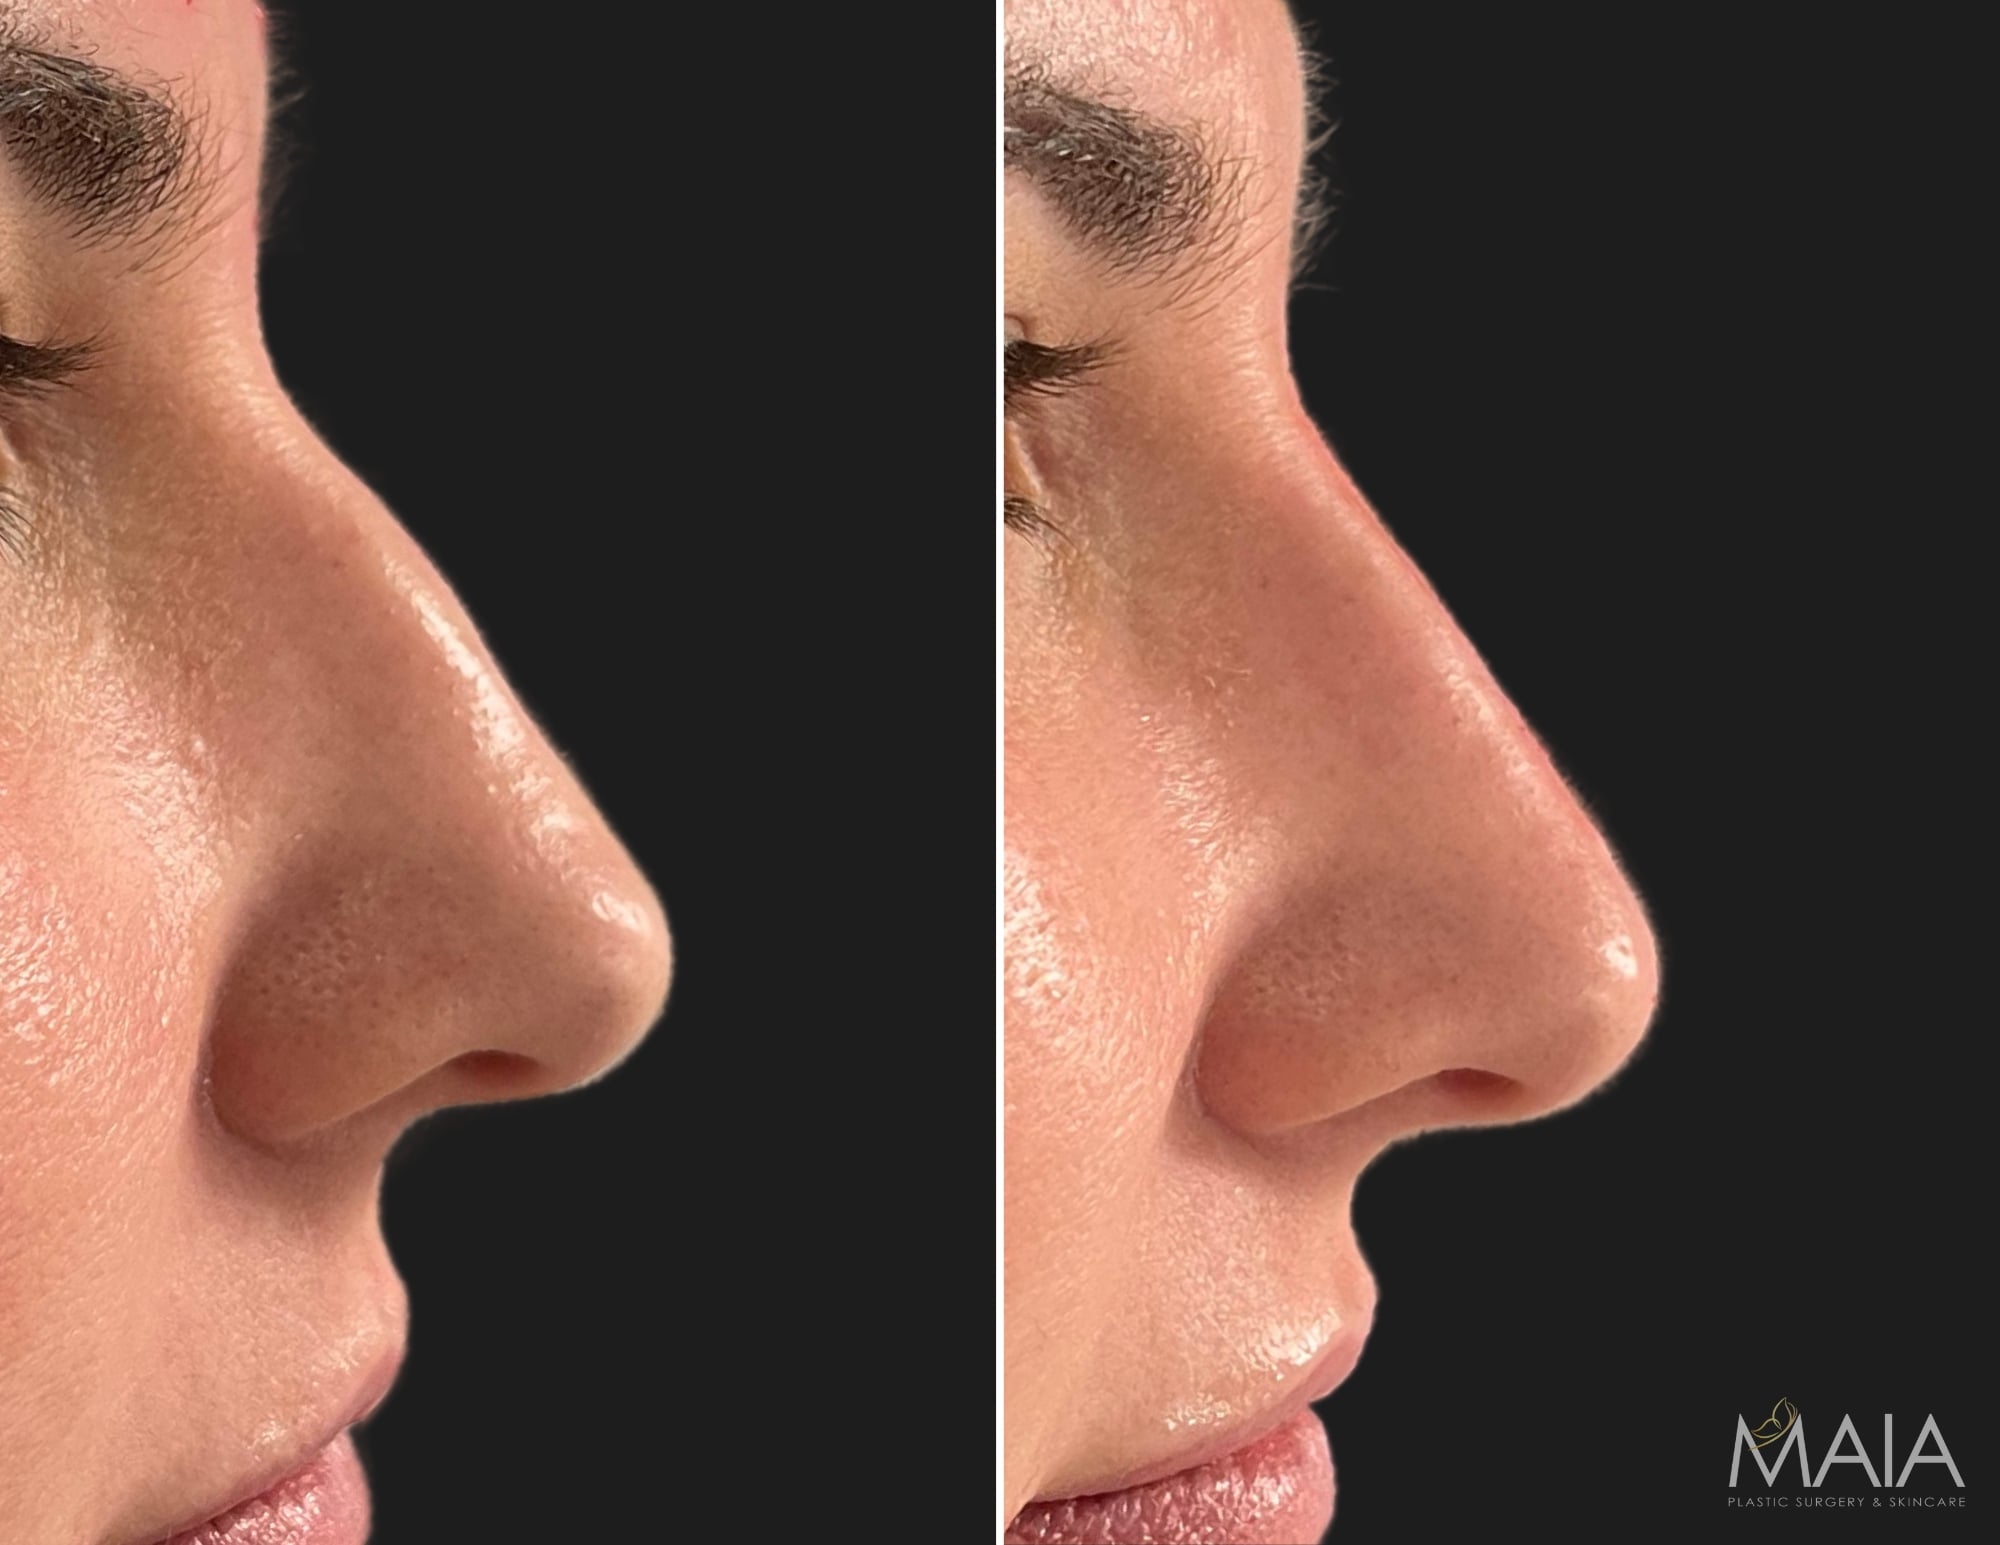 38 year-old female before and immediately after non-surgical rhinoplasty